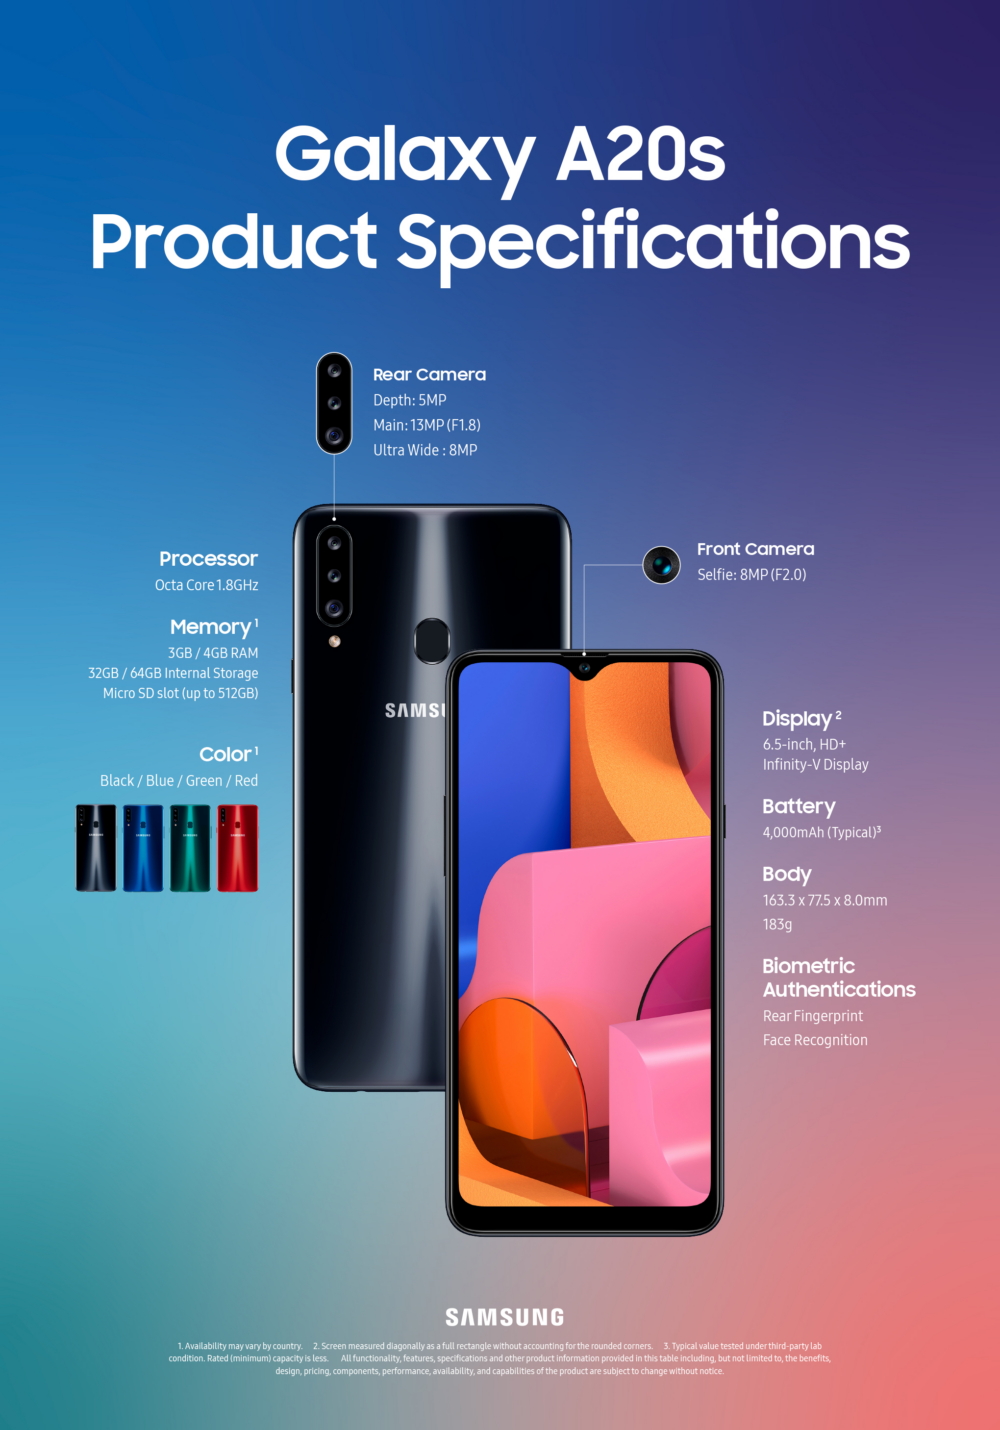 Samsung introduces new Galaxy A20s Mobile Galaxy-A20s-Product-Specifications_main.jpg